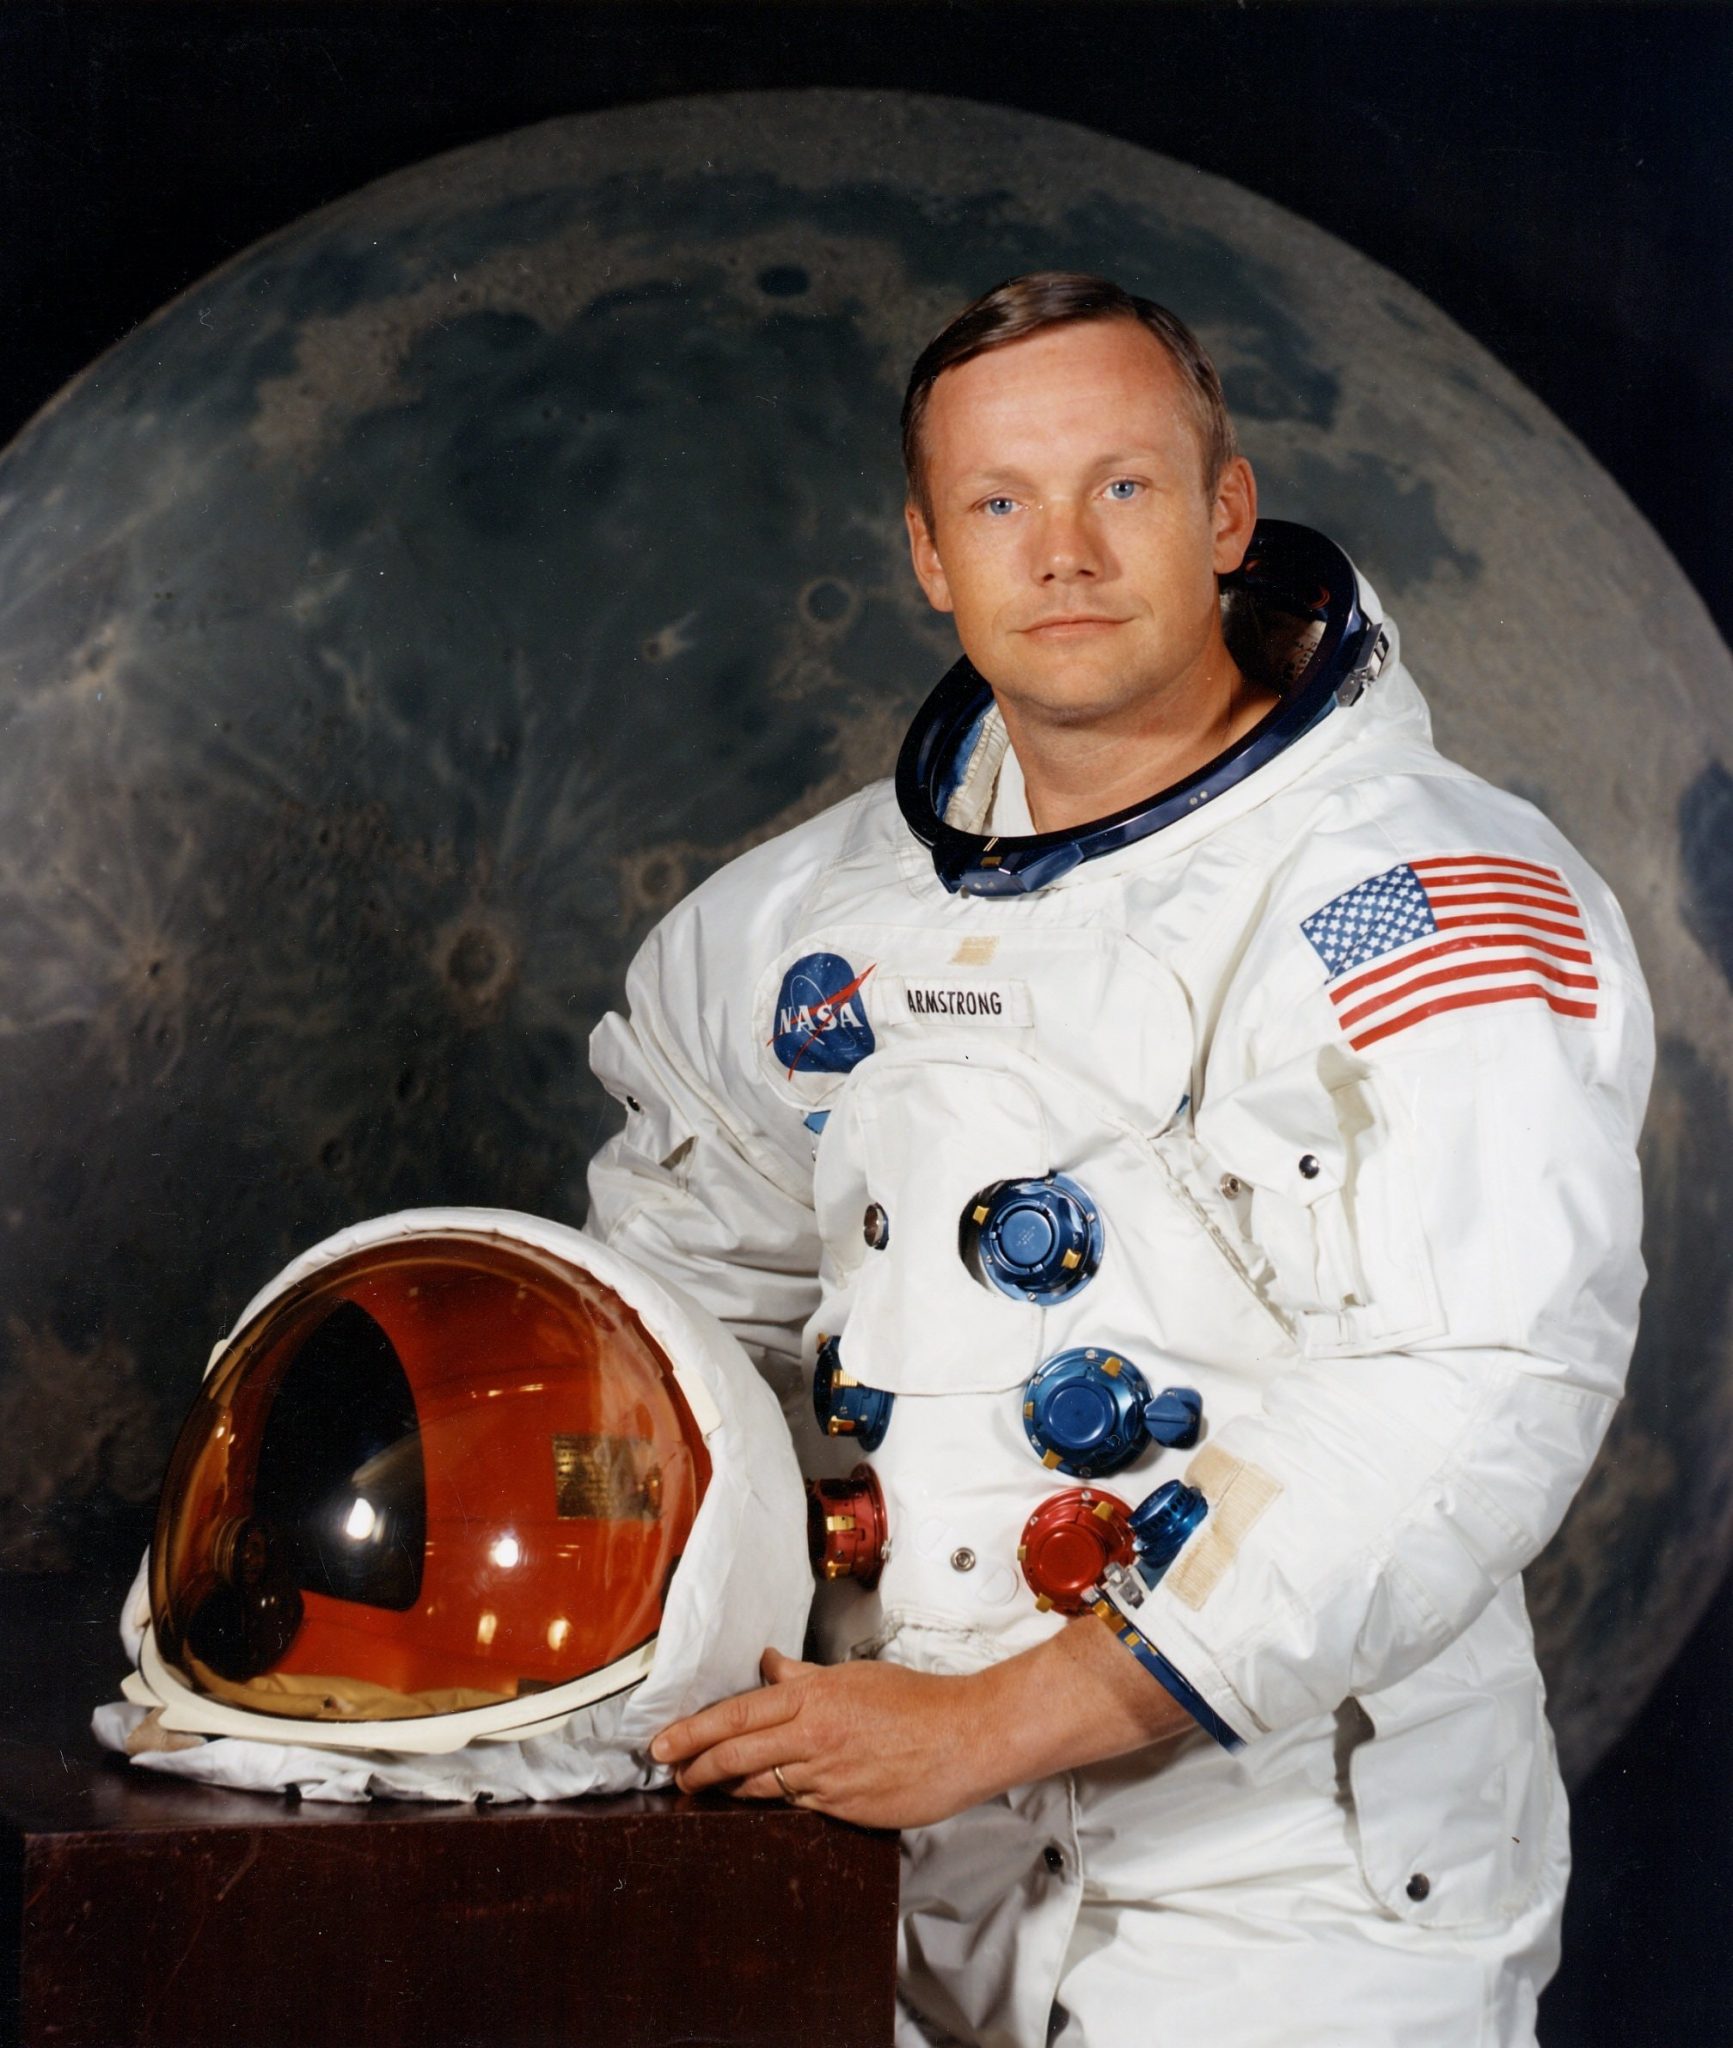 Neil Armstrong posing in front of moon backdrop while in astronaut gear holding helmet